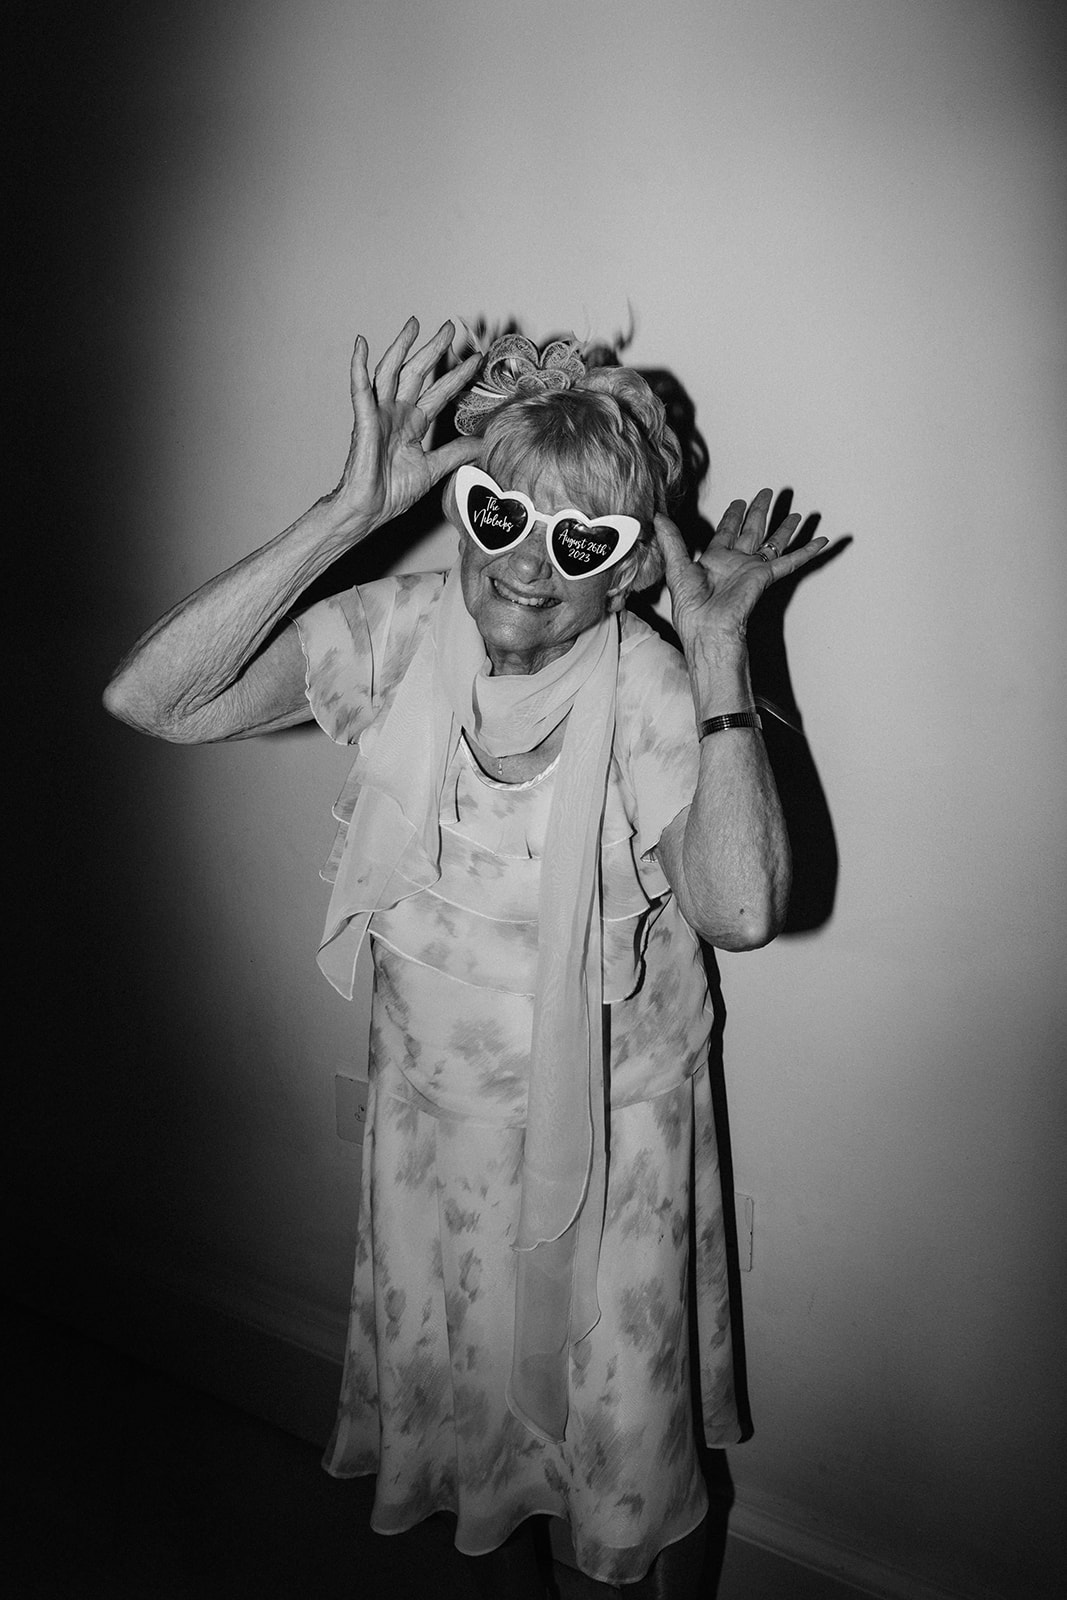 An elderly woman wearing heart shaped glasses poses for the camera